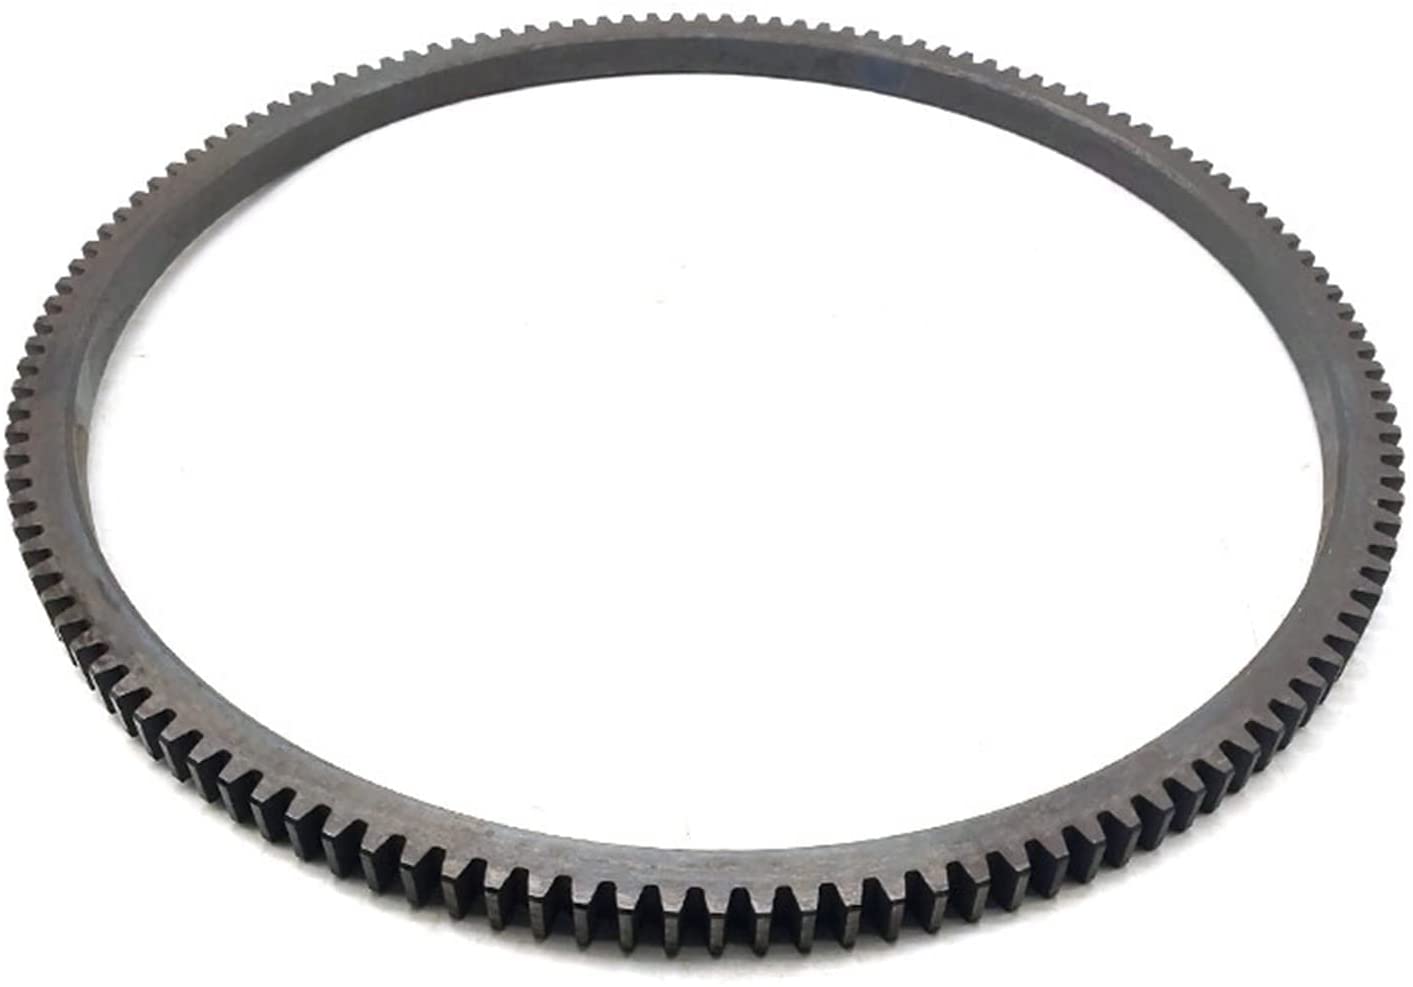 110T Fly Wheel Gear Ring for Komatsu Engine 4D95 Excavator PC60-5 PC60-6 PC120-5 PC120-6 - Buymachineryparts